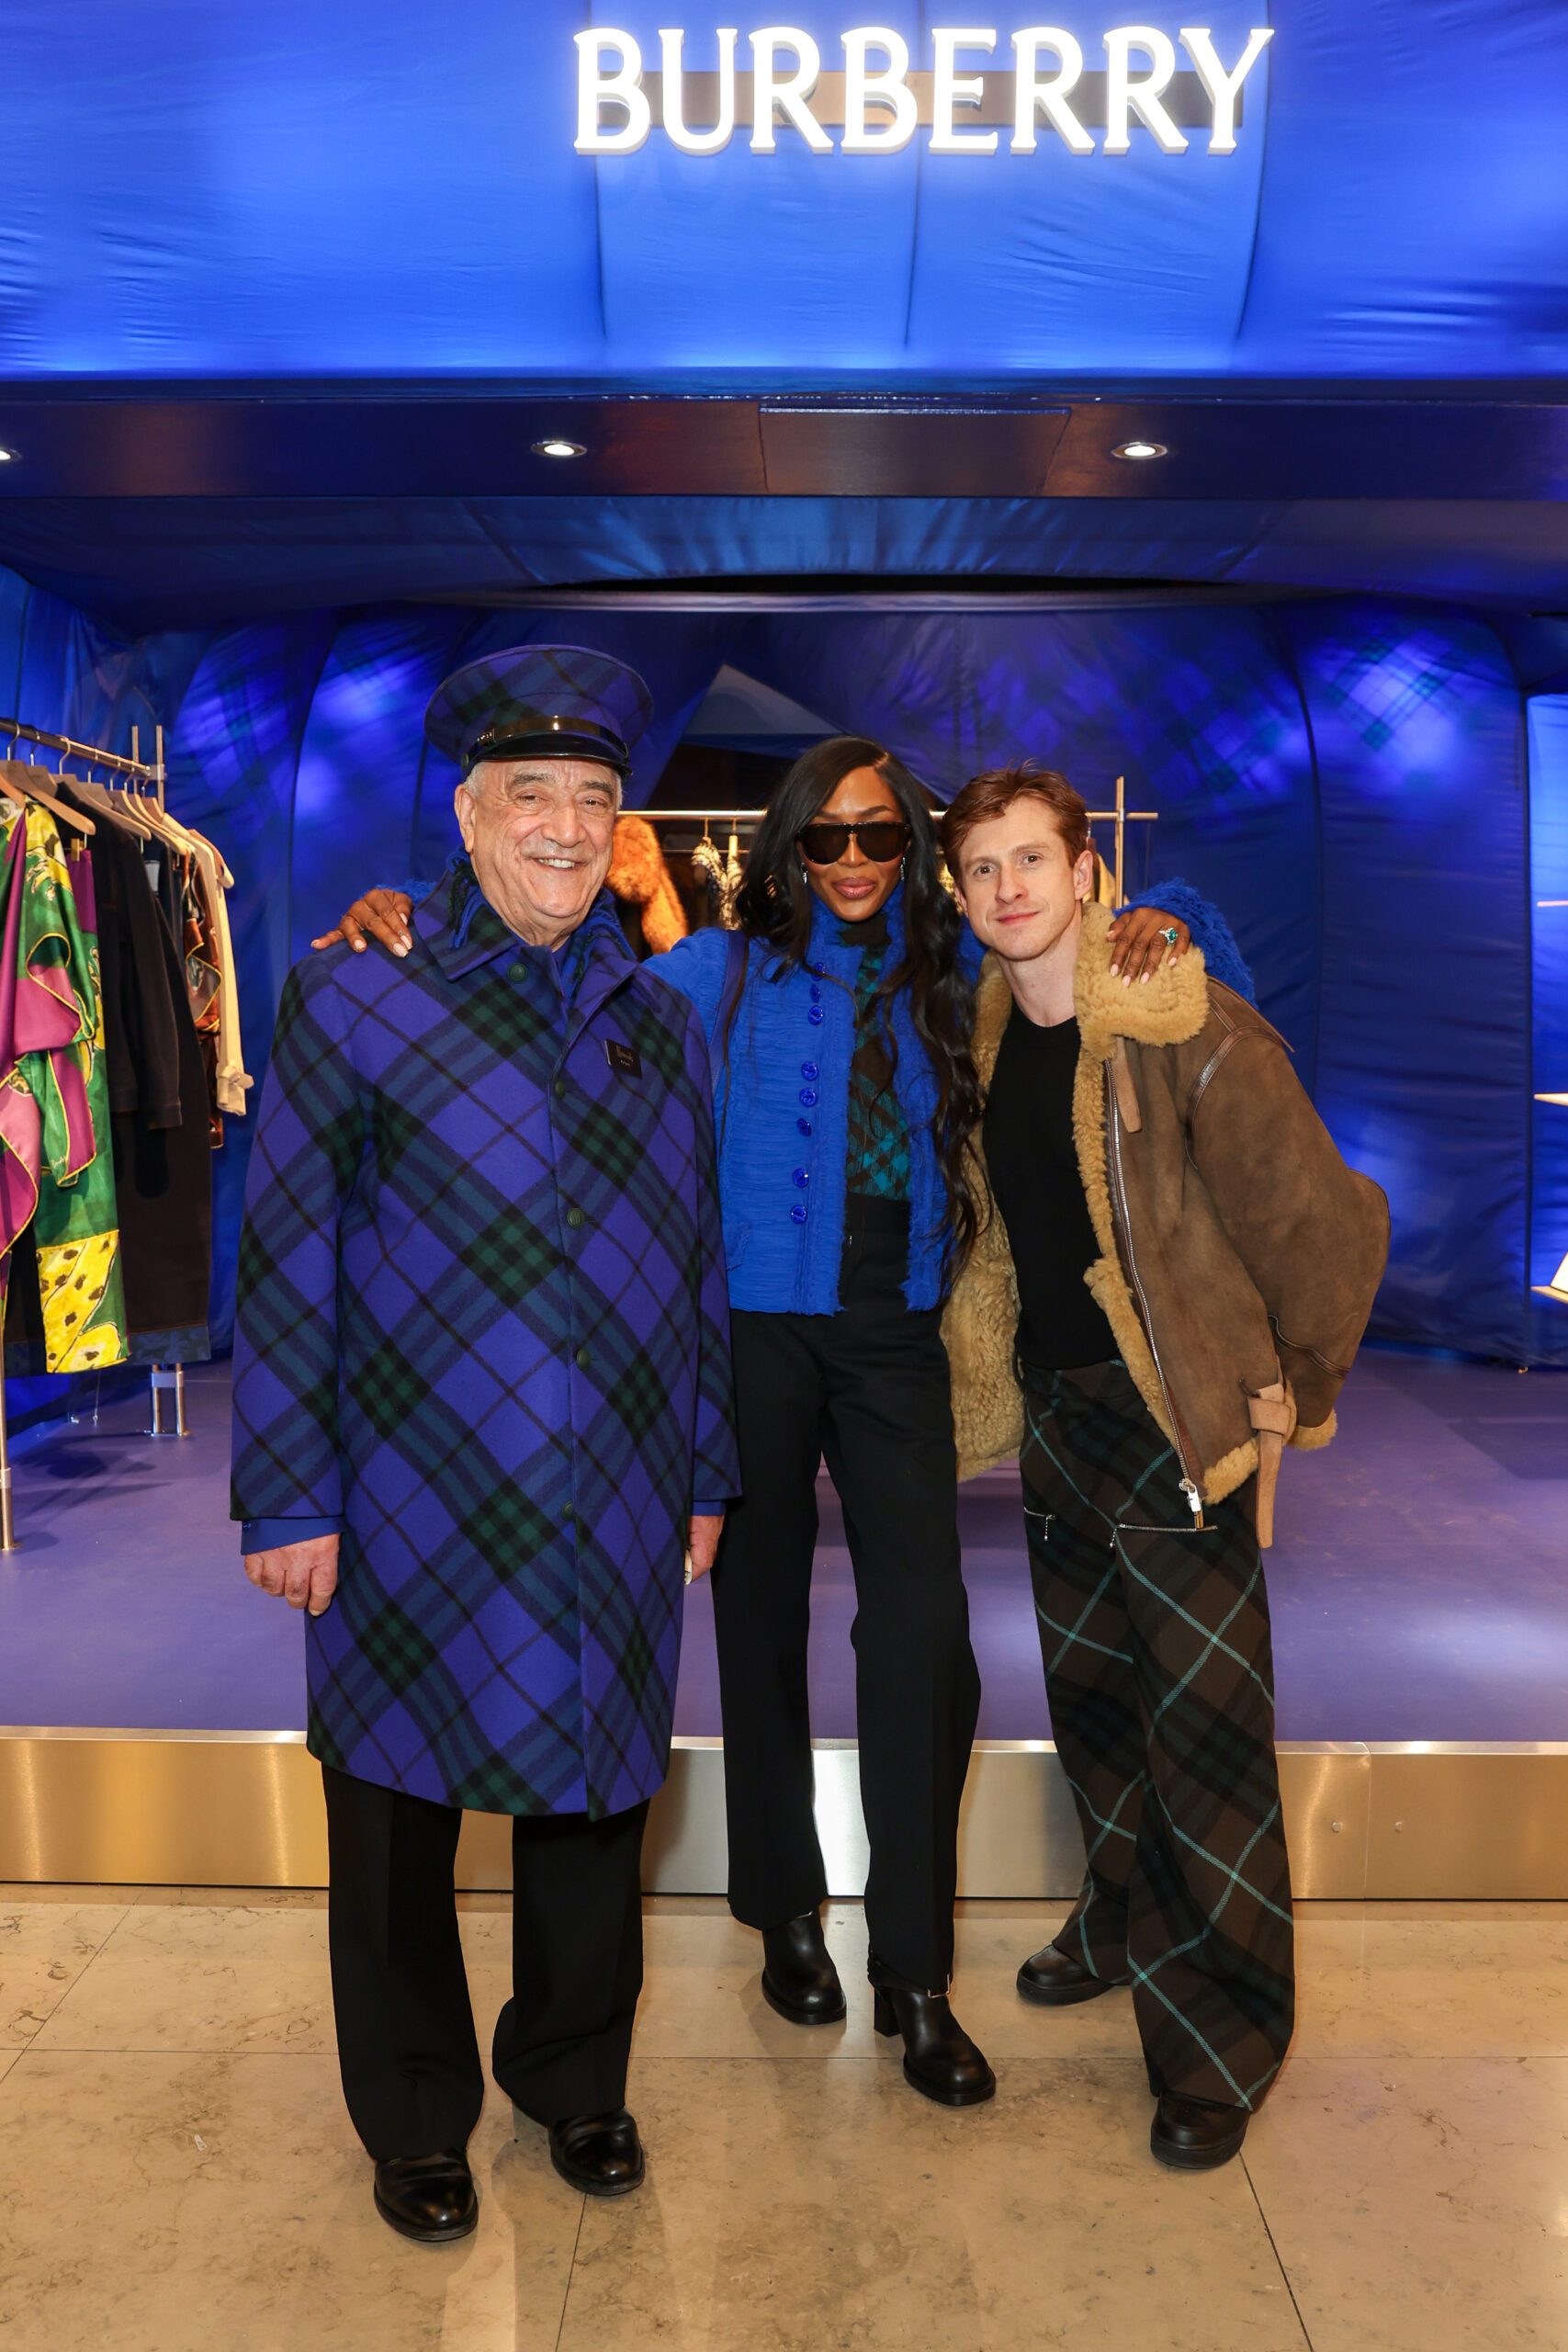 Harrods doorman, Naomi Campbell and Burberry Chief Creative Officer Daniel Lee pose together at the Burberry takeover of Harrods event, with a vibrant Burberry blue backdrop.